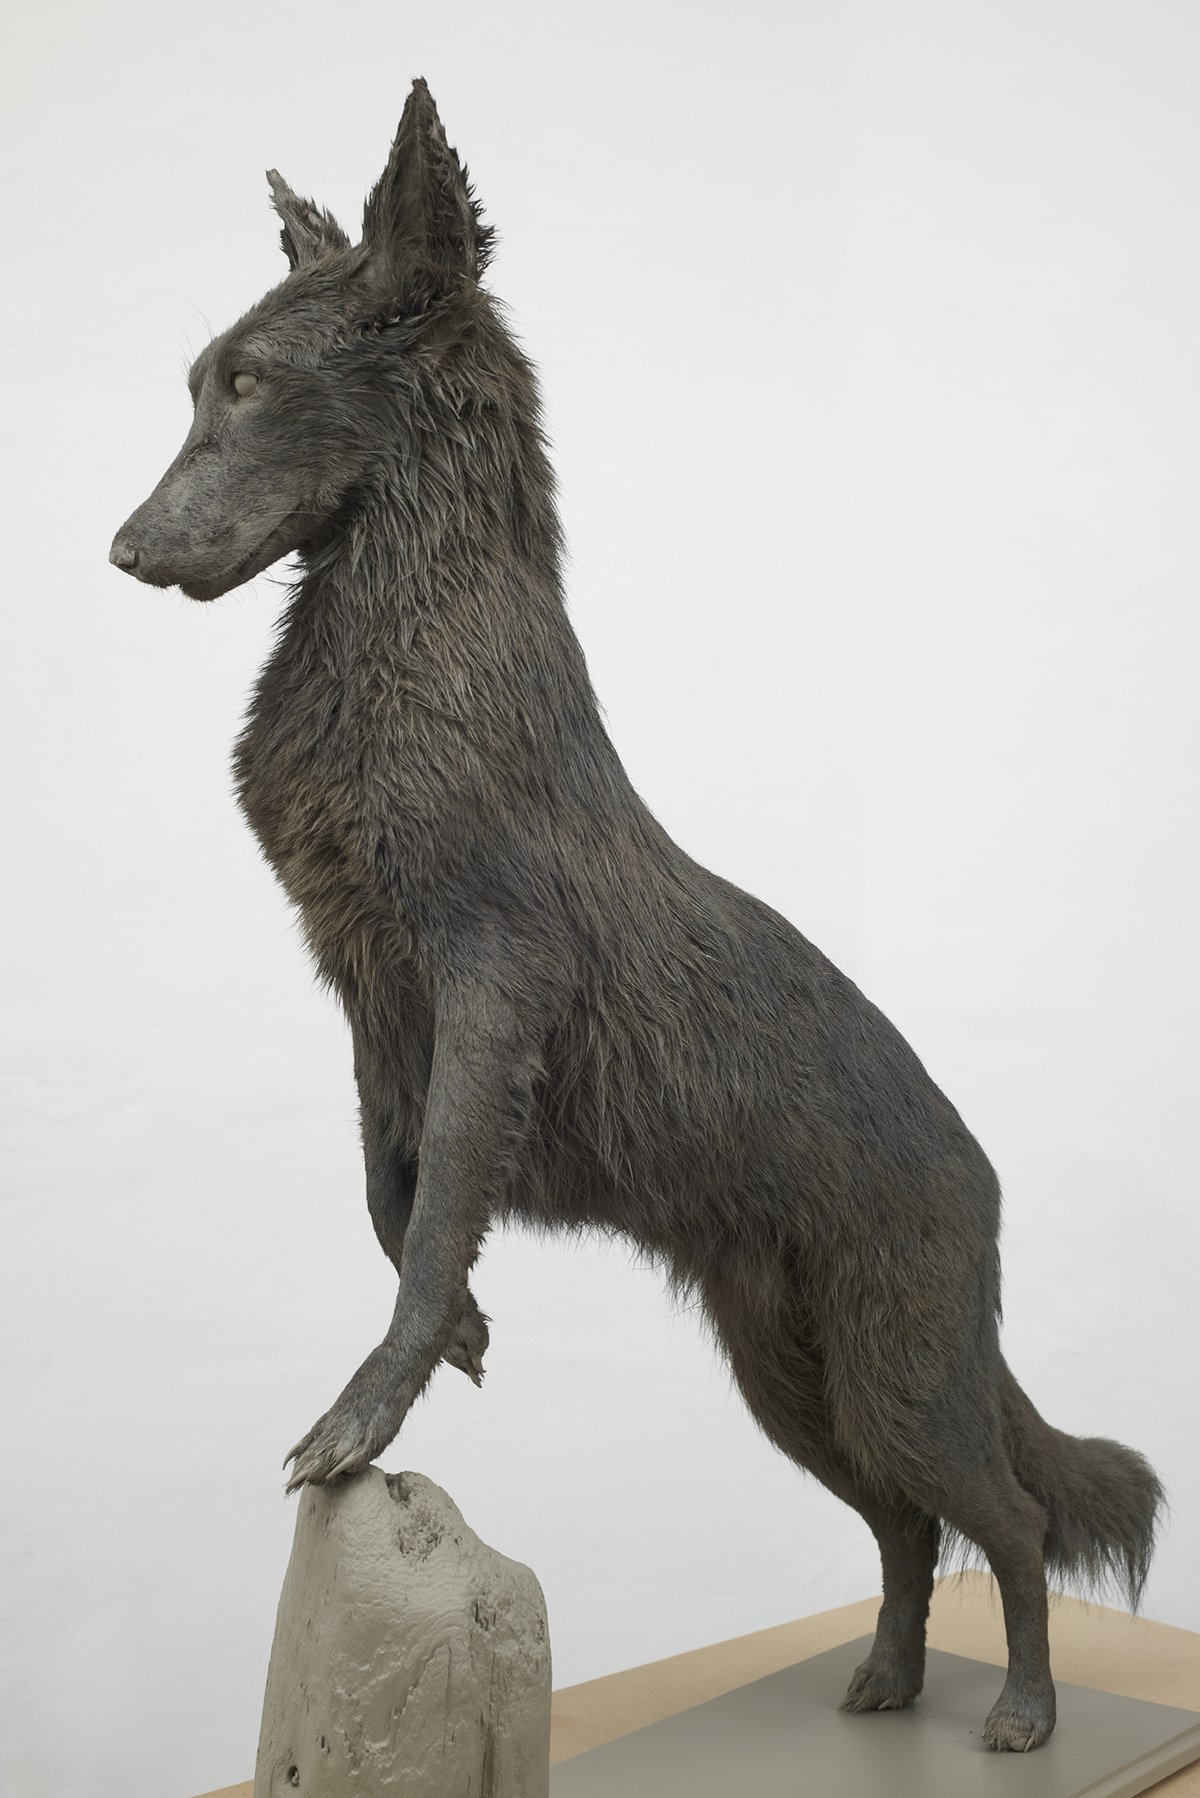 Gaylen GerberSupport, n.d.Oil paint on coyote taxidermy, 20th century, United States96.5 x 82 x 29.7 cm